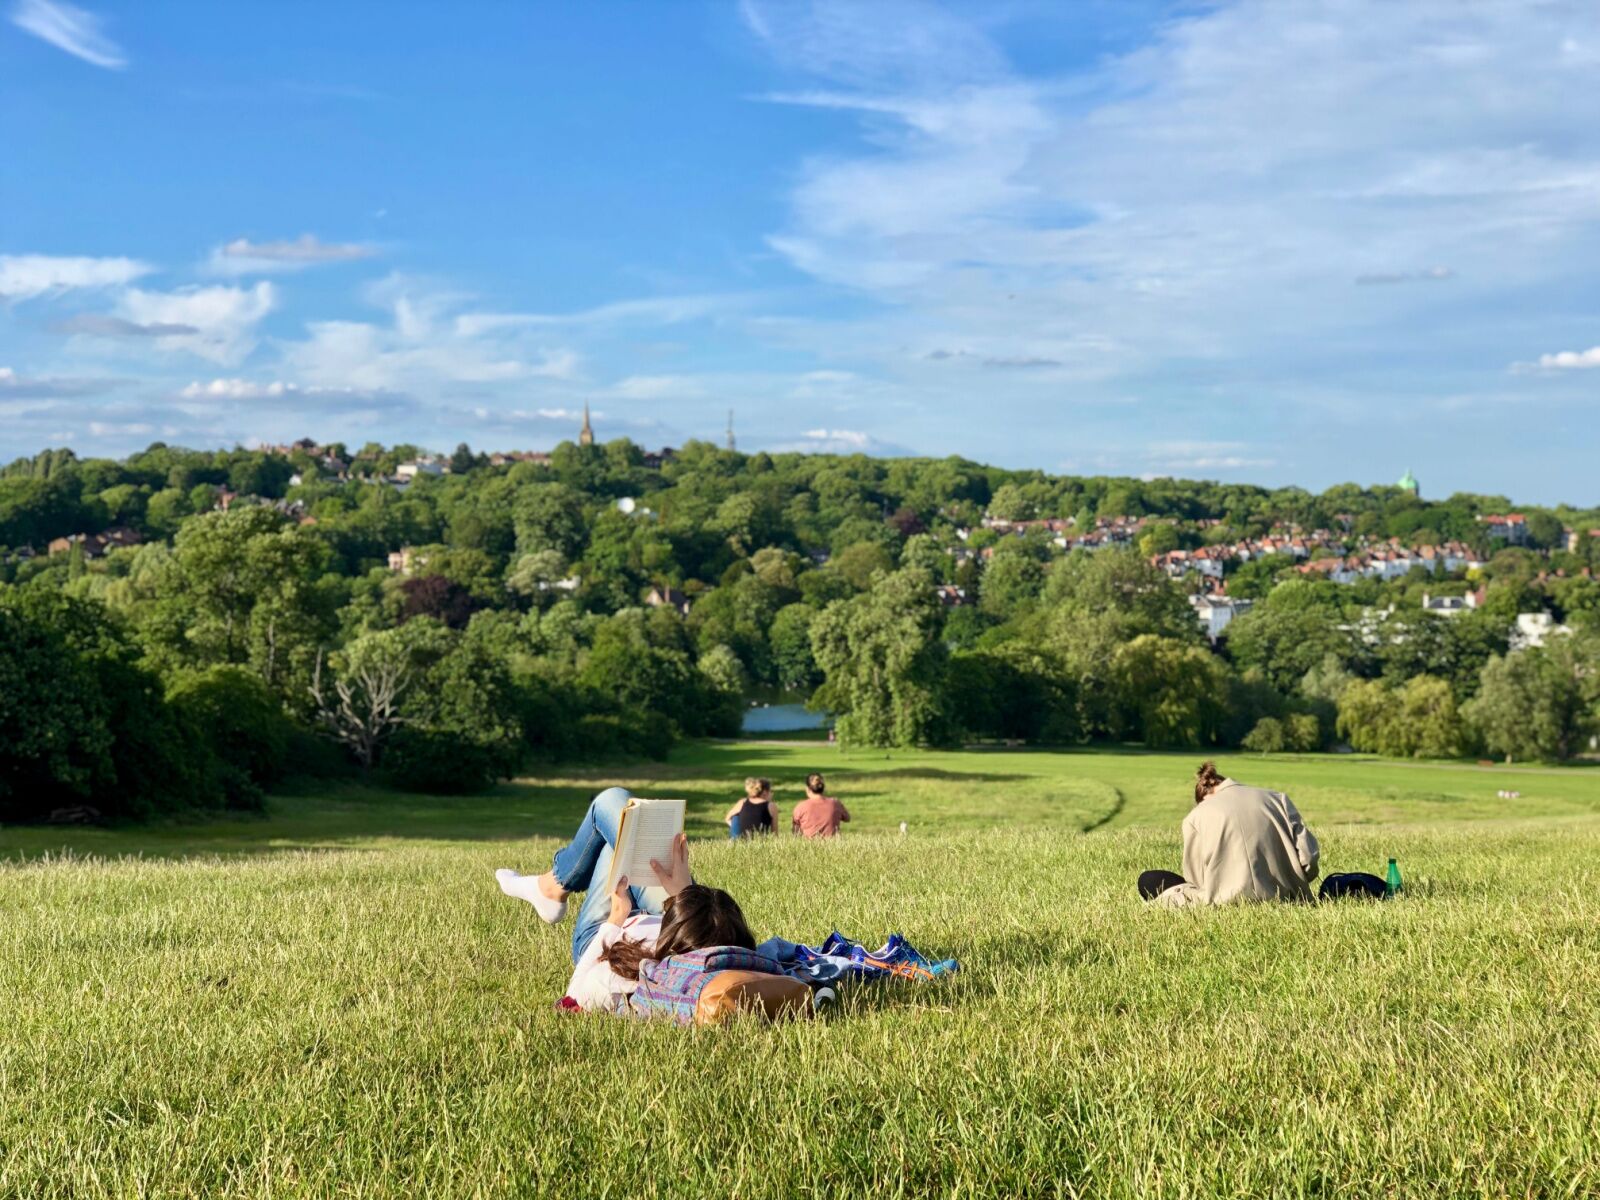 parks in london - people on grass at hamsptead heath